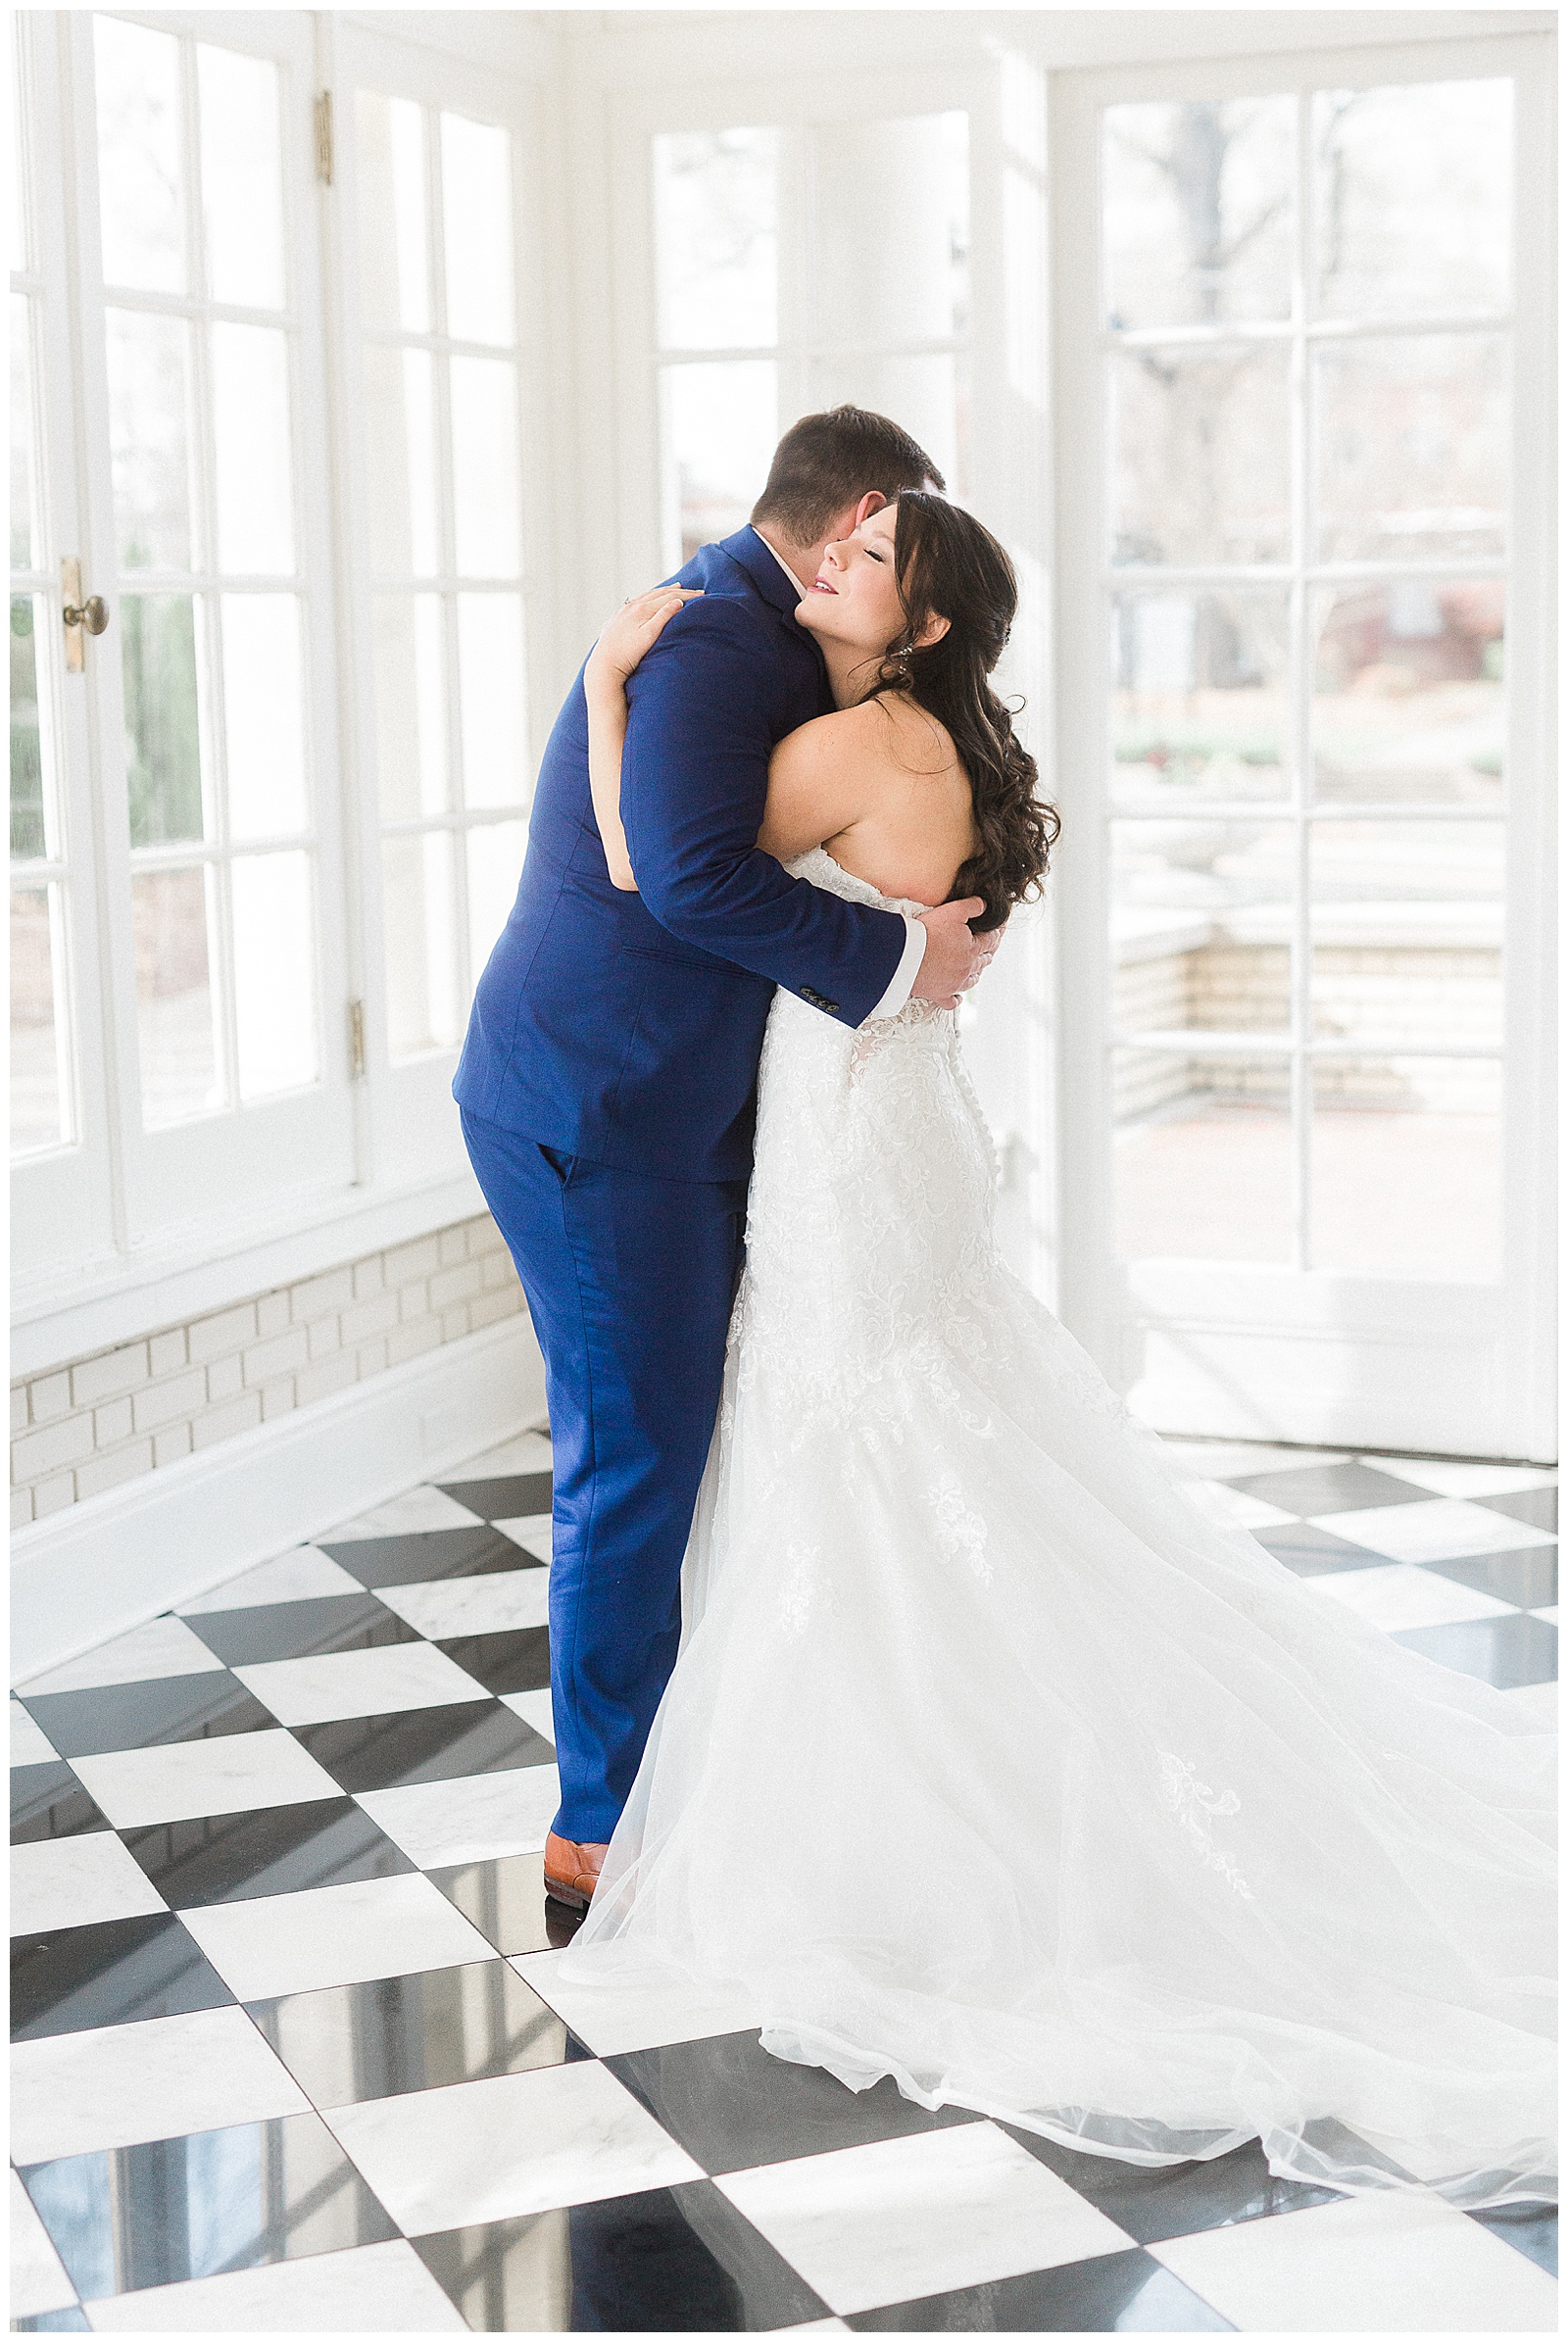 Groom Hugs Bride from Light and Airy Outdoor Wedding at Separk Mansion in Gastonia, NC | Kevyn Dixon Photography